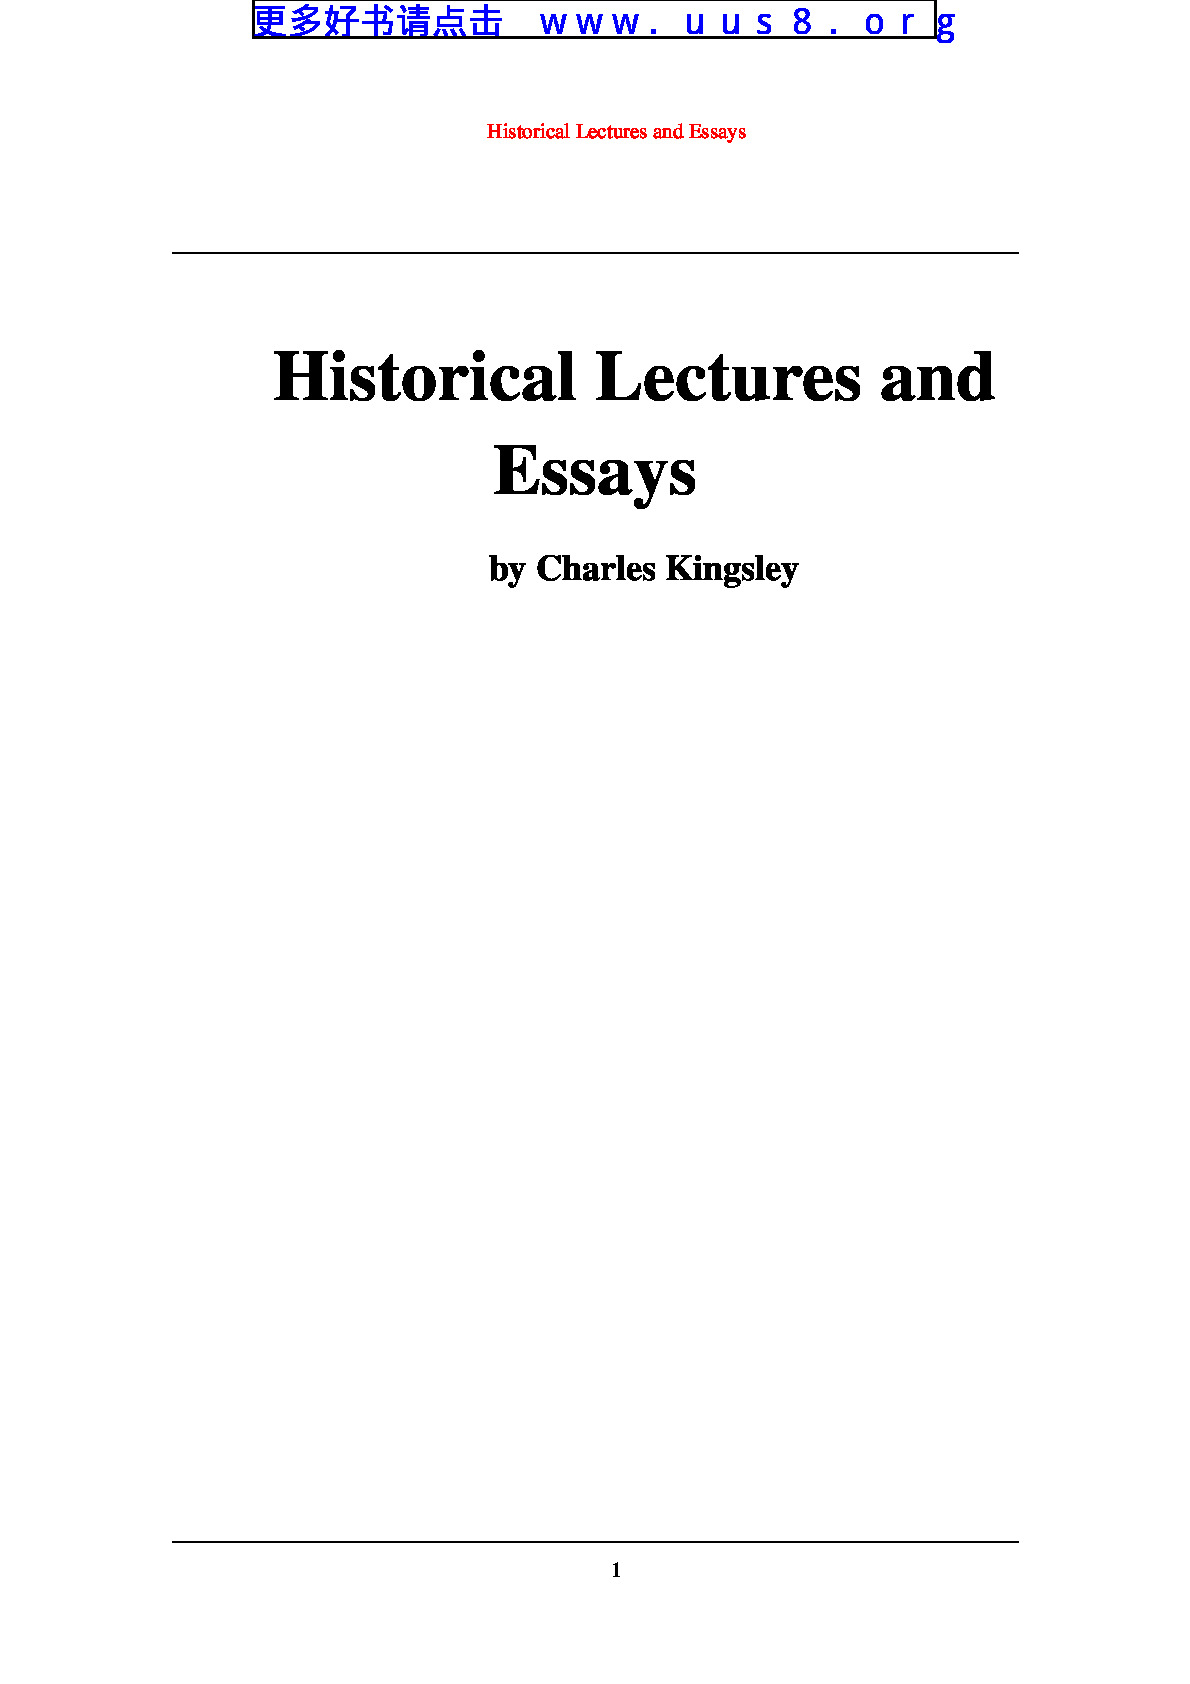 Historical_Lectures_and_Essays(查尔斯金斯利历史讲座)